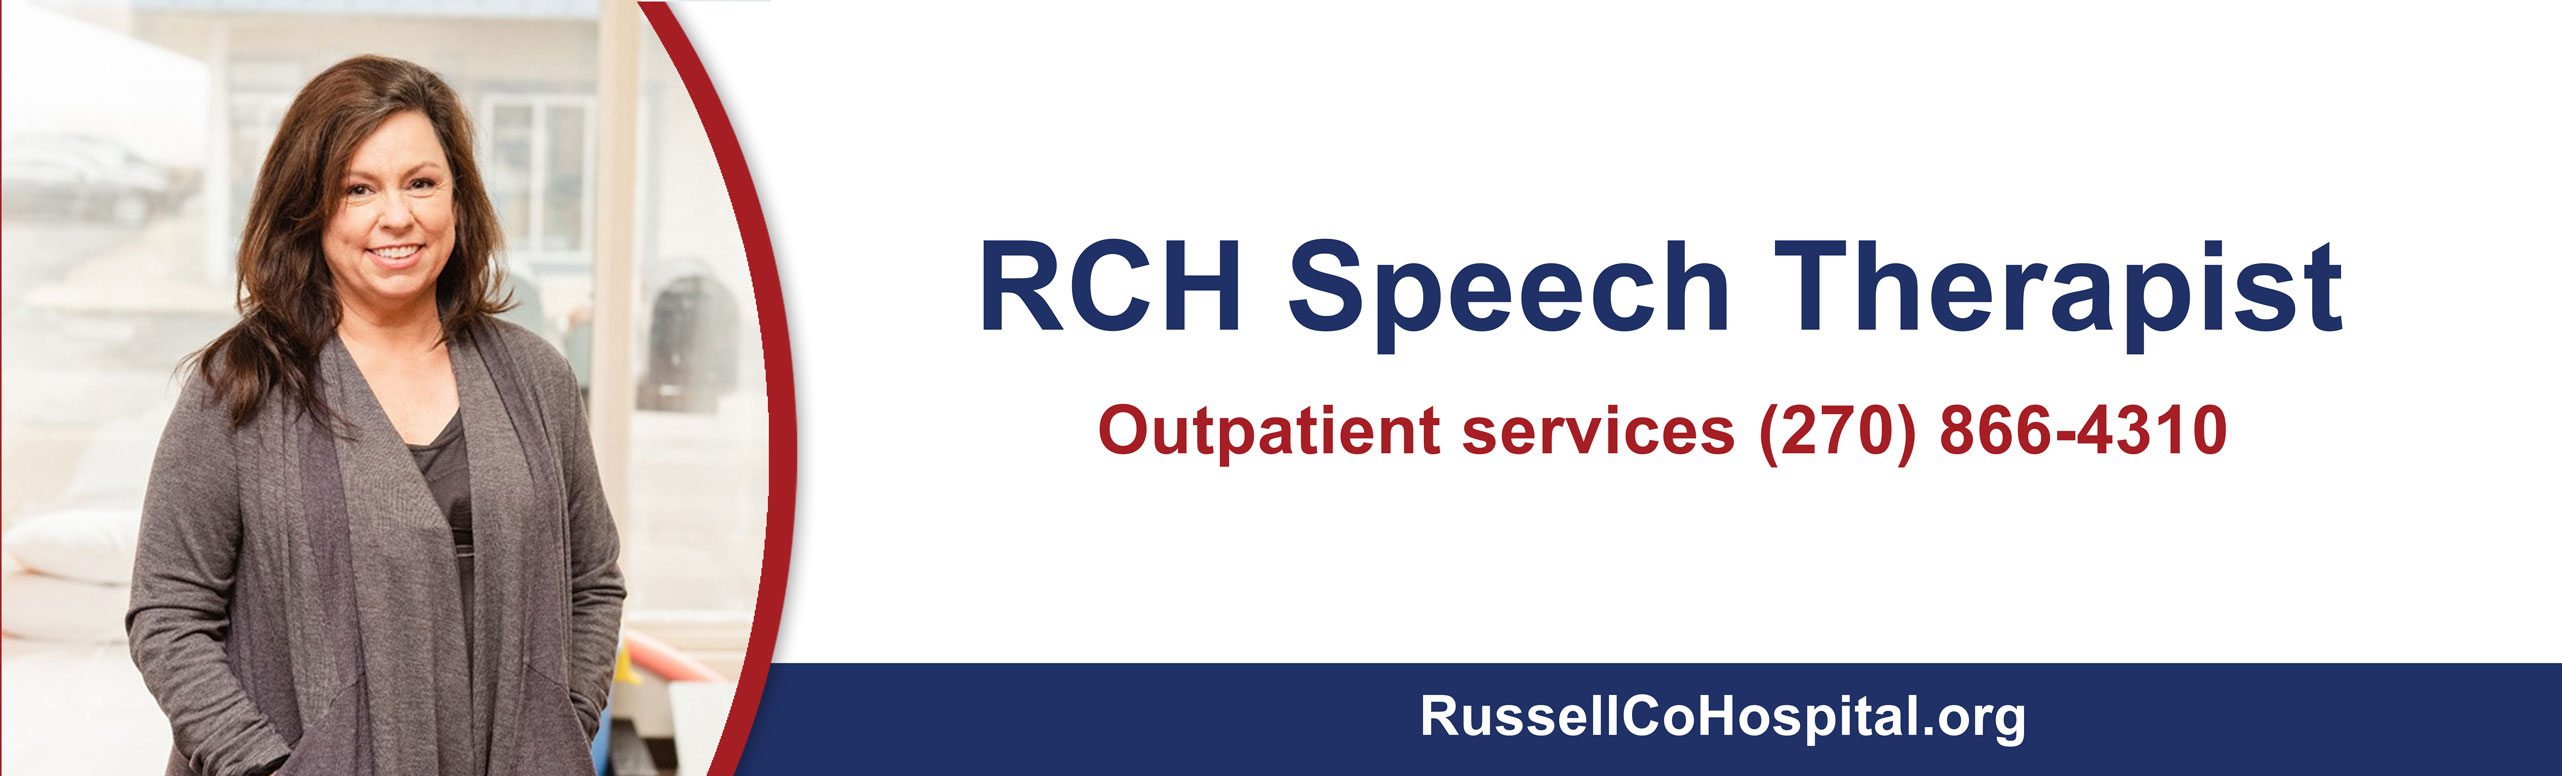 RCH Speech Therapist
Outpatient Services (270) 866-4310
RussellCoHospital.org